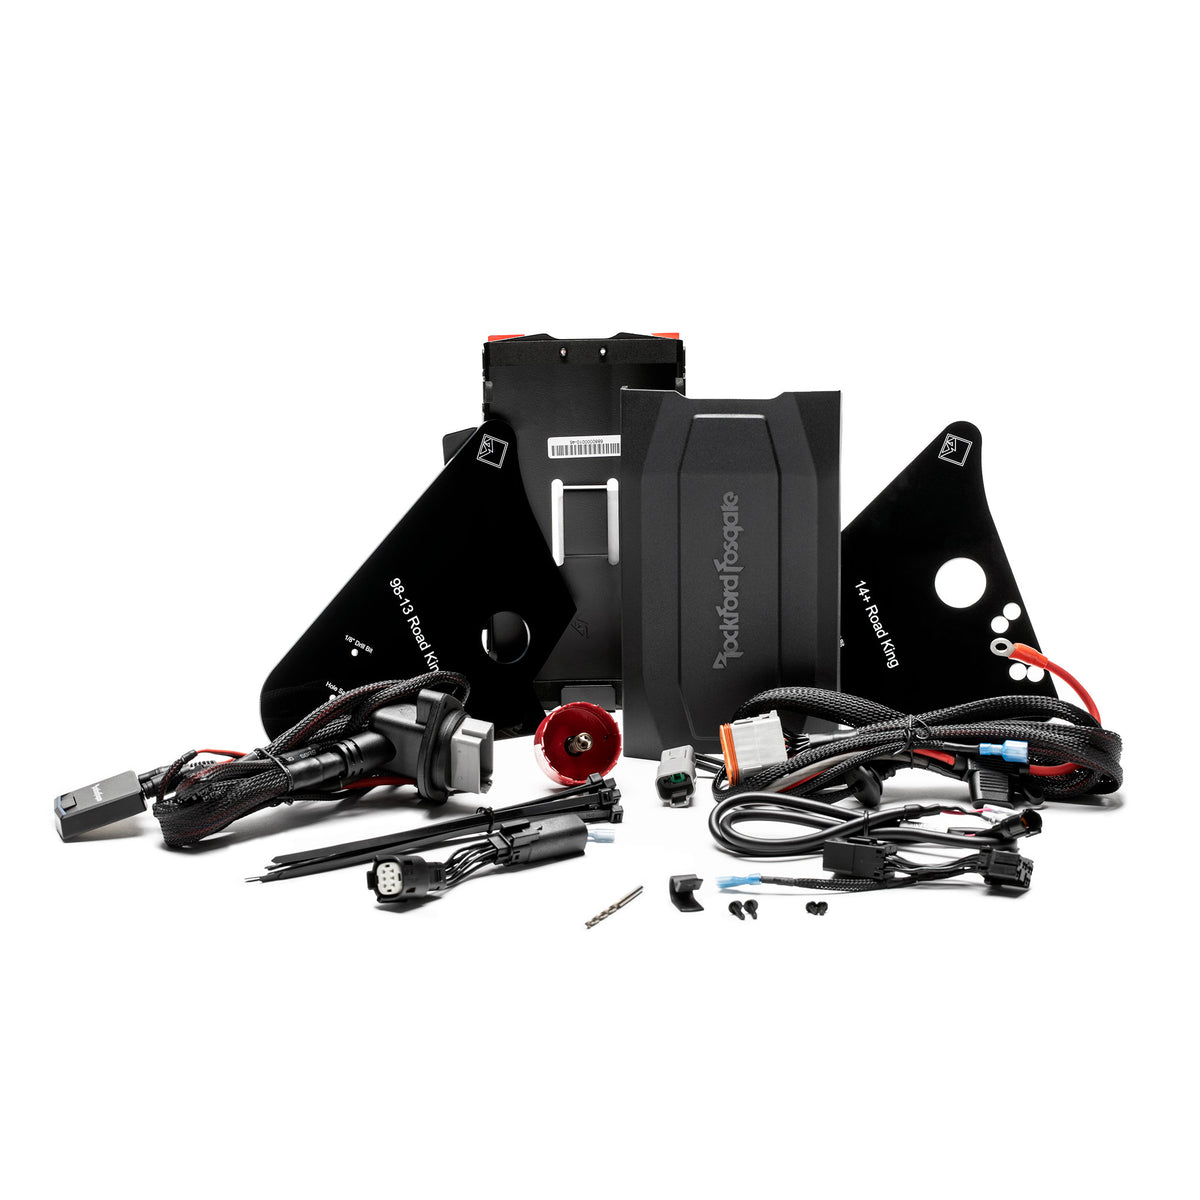 Complete Amp Install Kit for Select 2014+ Harley Davidson Motorcycles